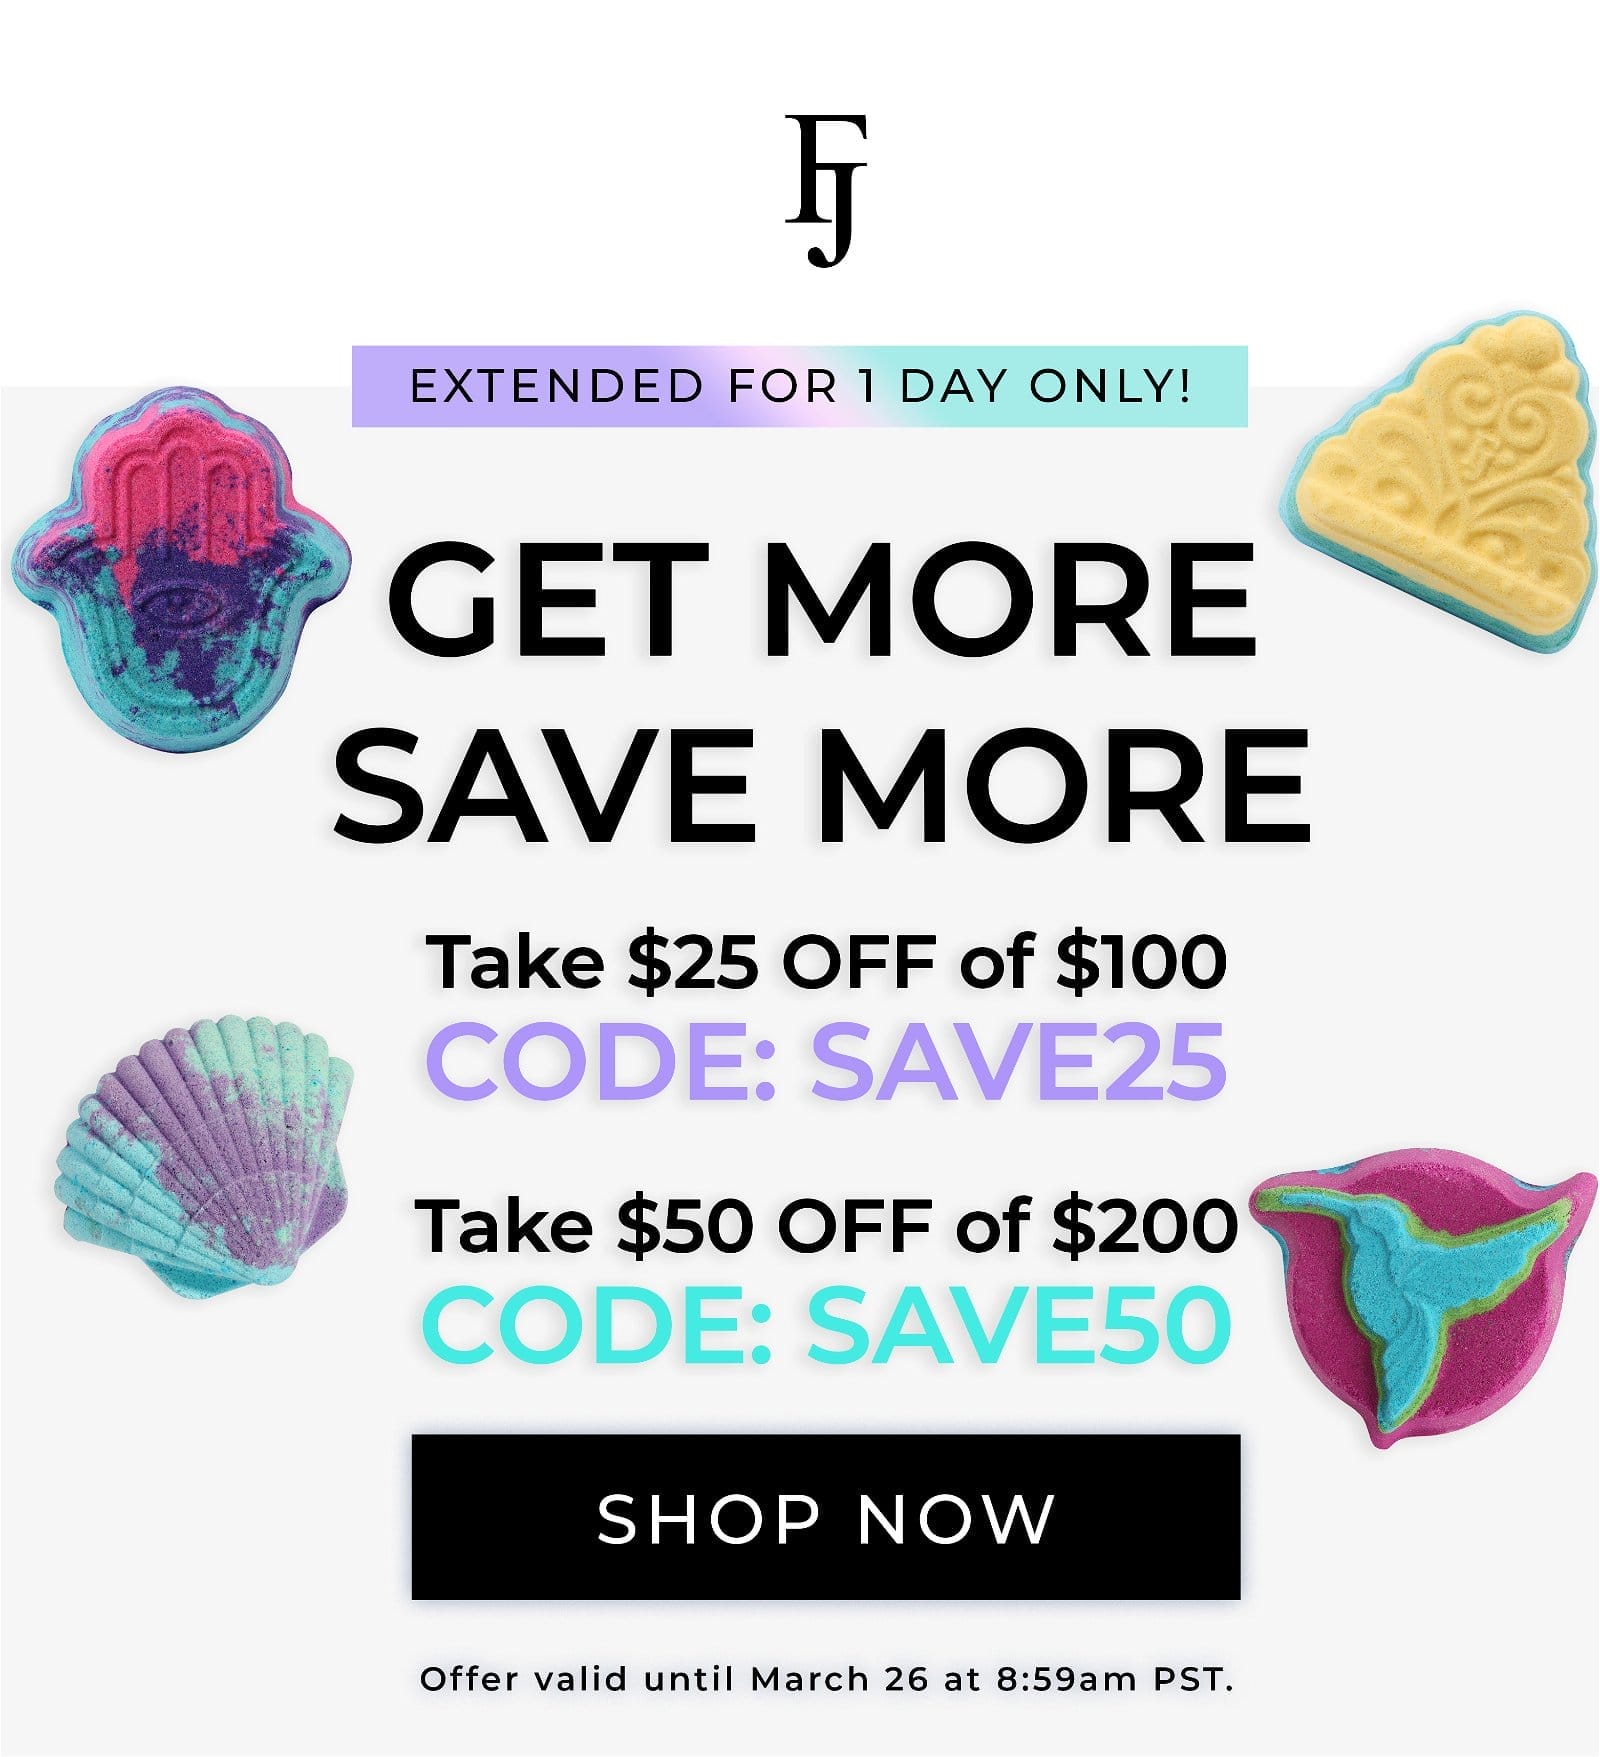 Get More Save More | \\$25 off \\$100 or \\$50 off \\$200